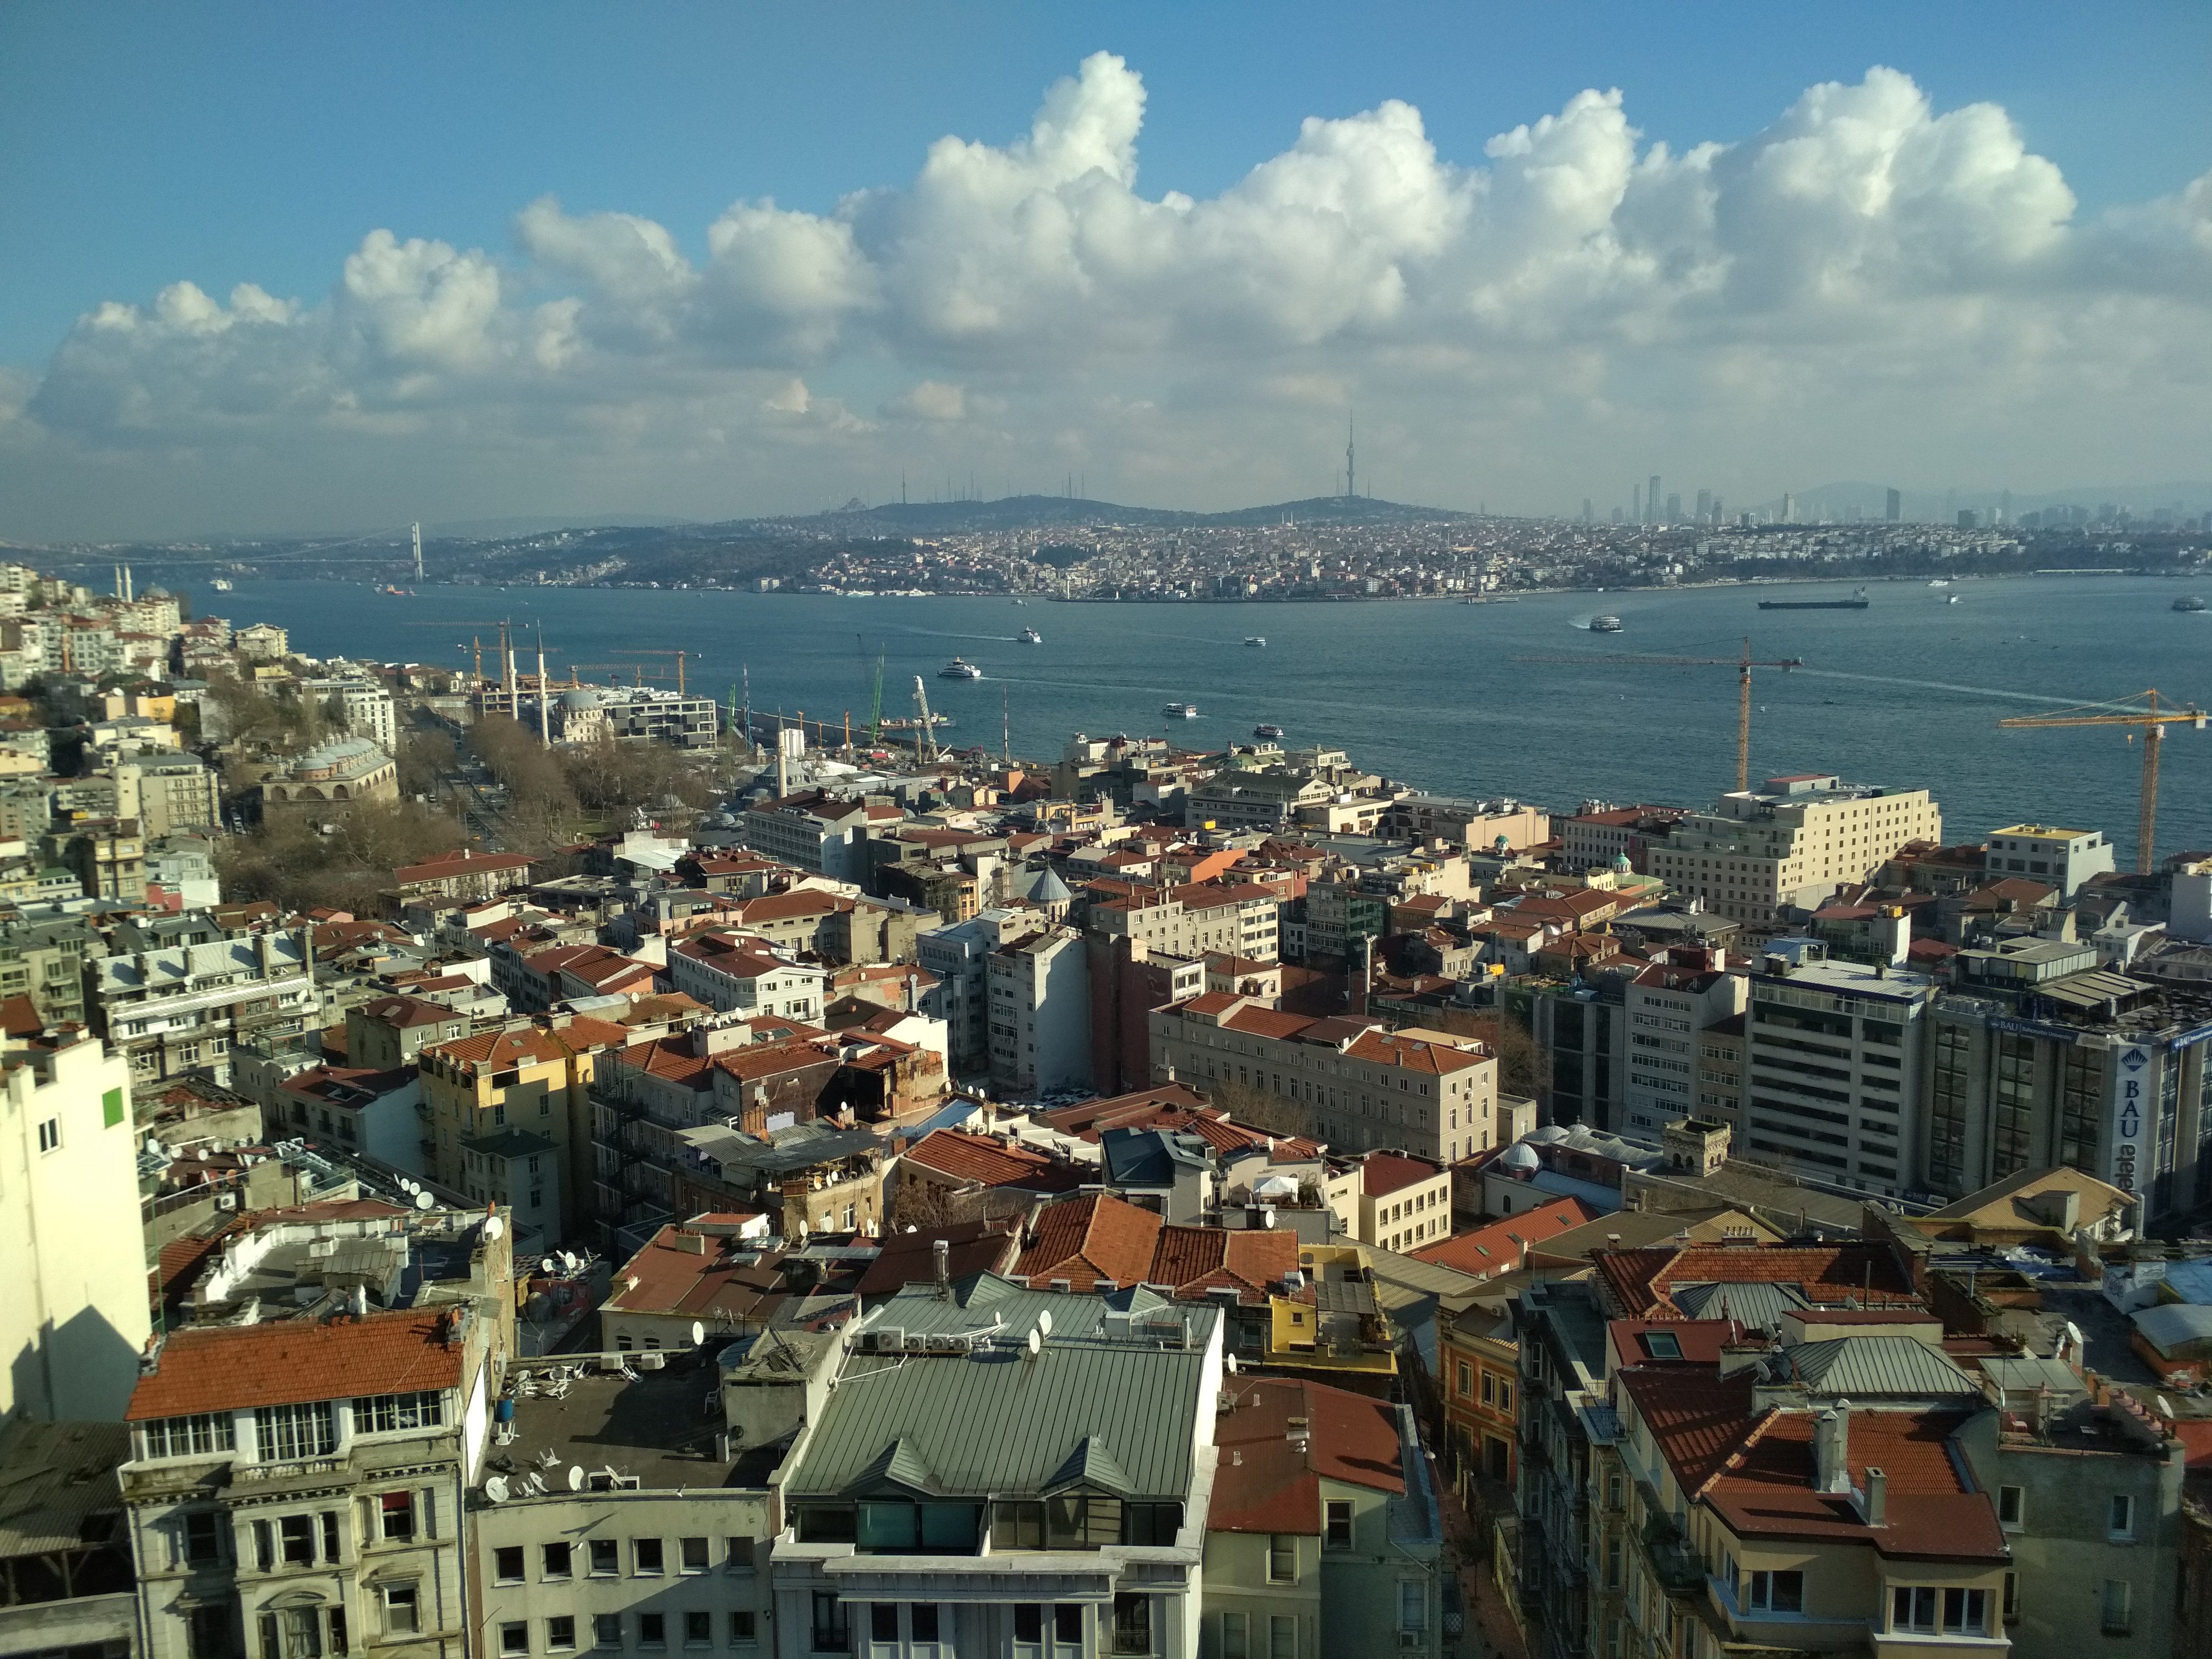 Caption: A photo of the Bosphorus and part of Istanbul from the top of the Galata tower, Istanbul, Turkey. (@DeniGu)